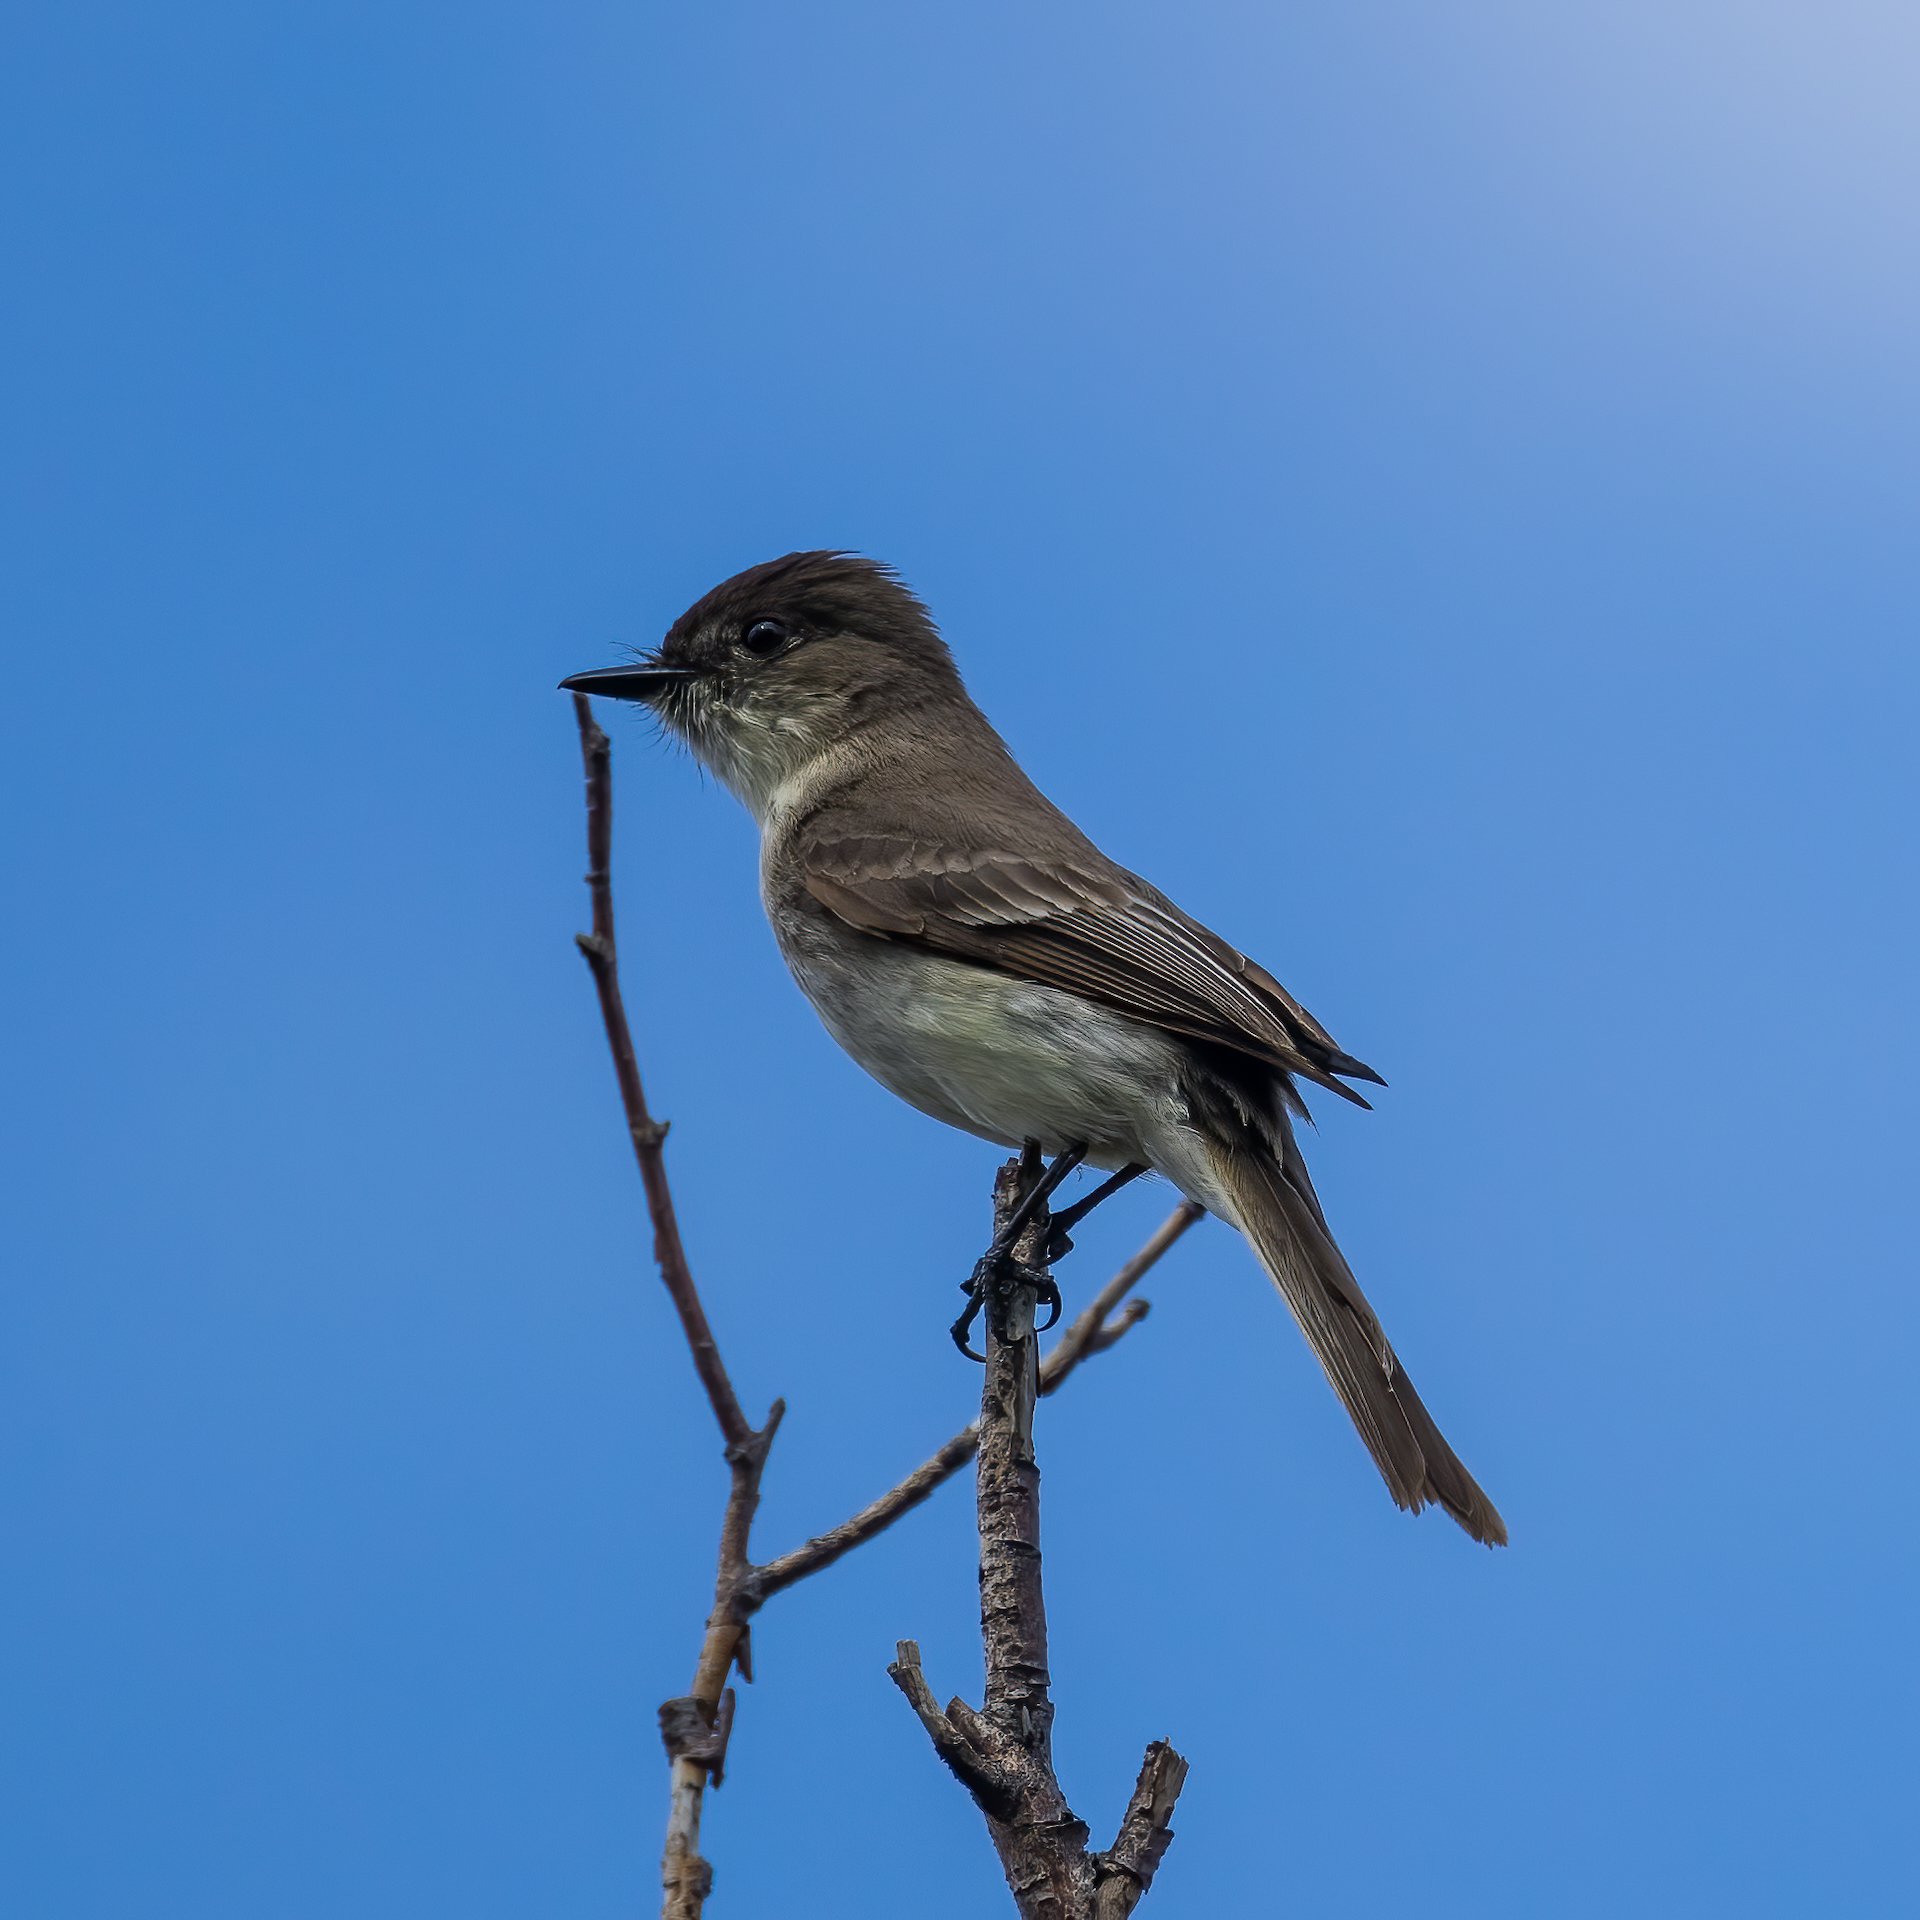  Our Eastern Phoebe While not the prettiest bird in the world, flycatchers are always interesting to watch.  